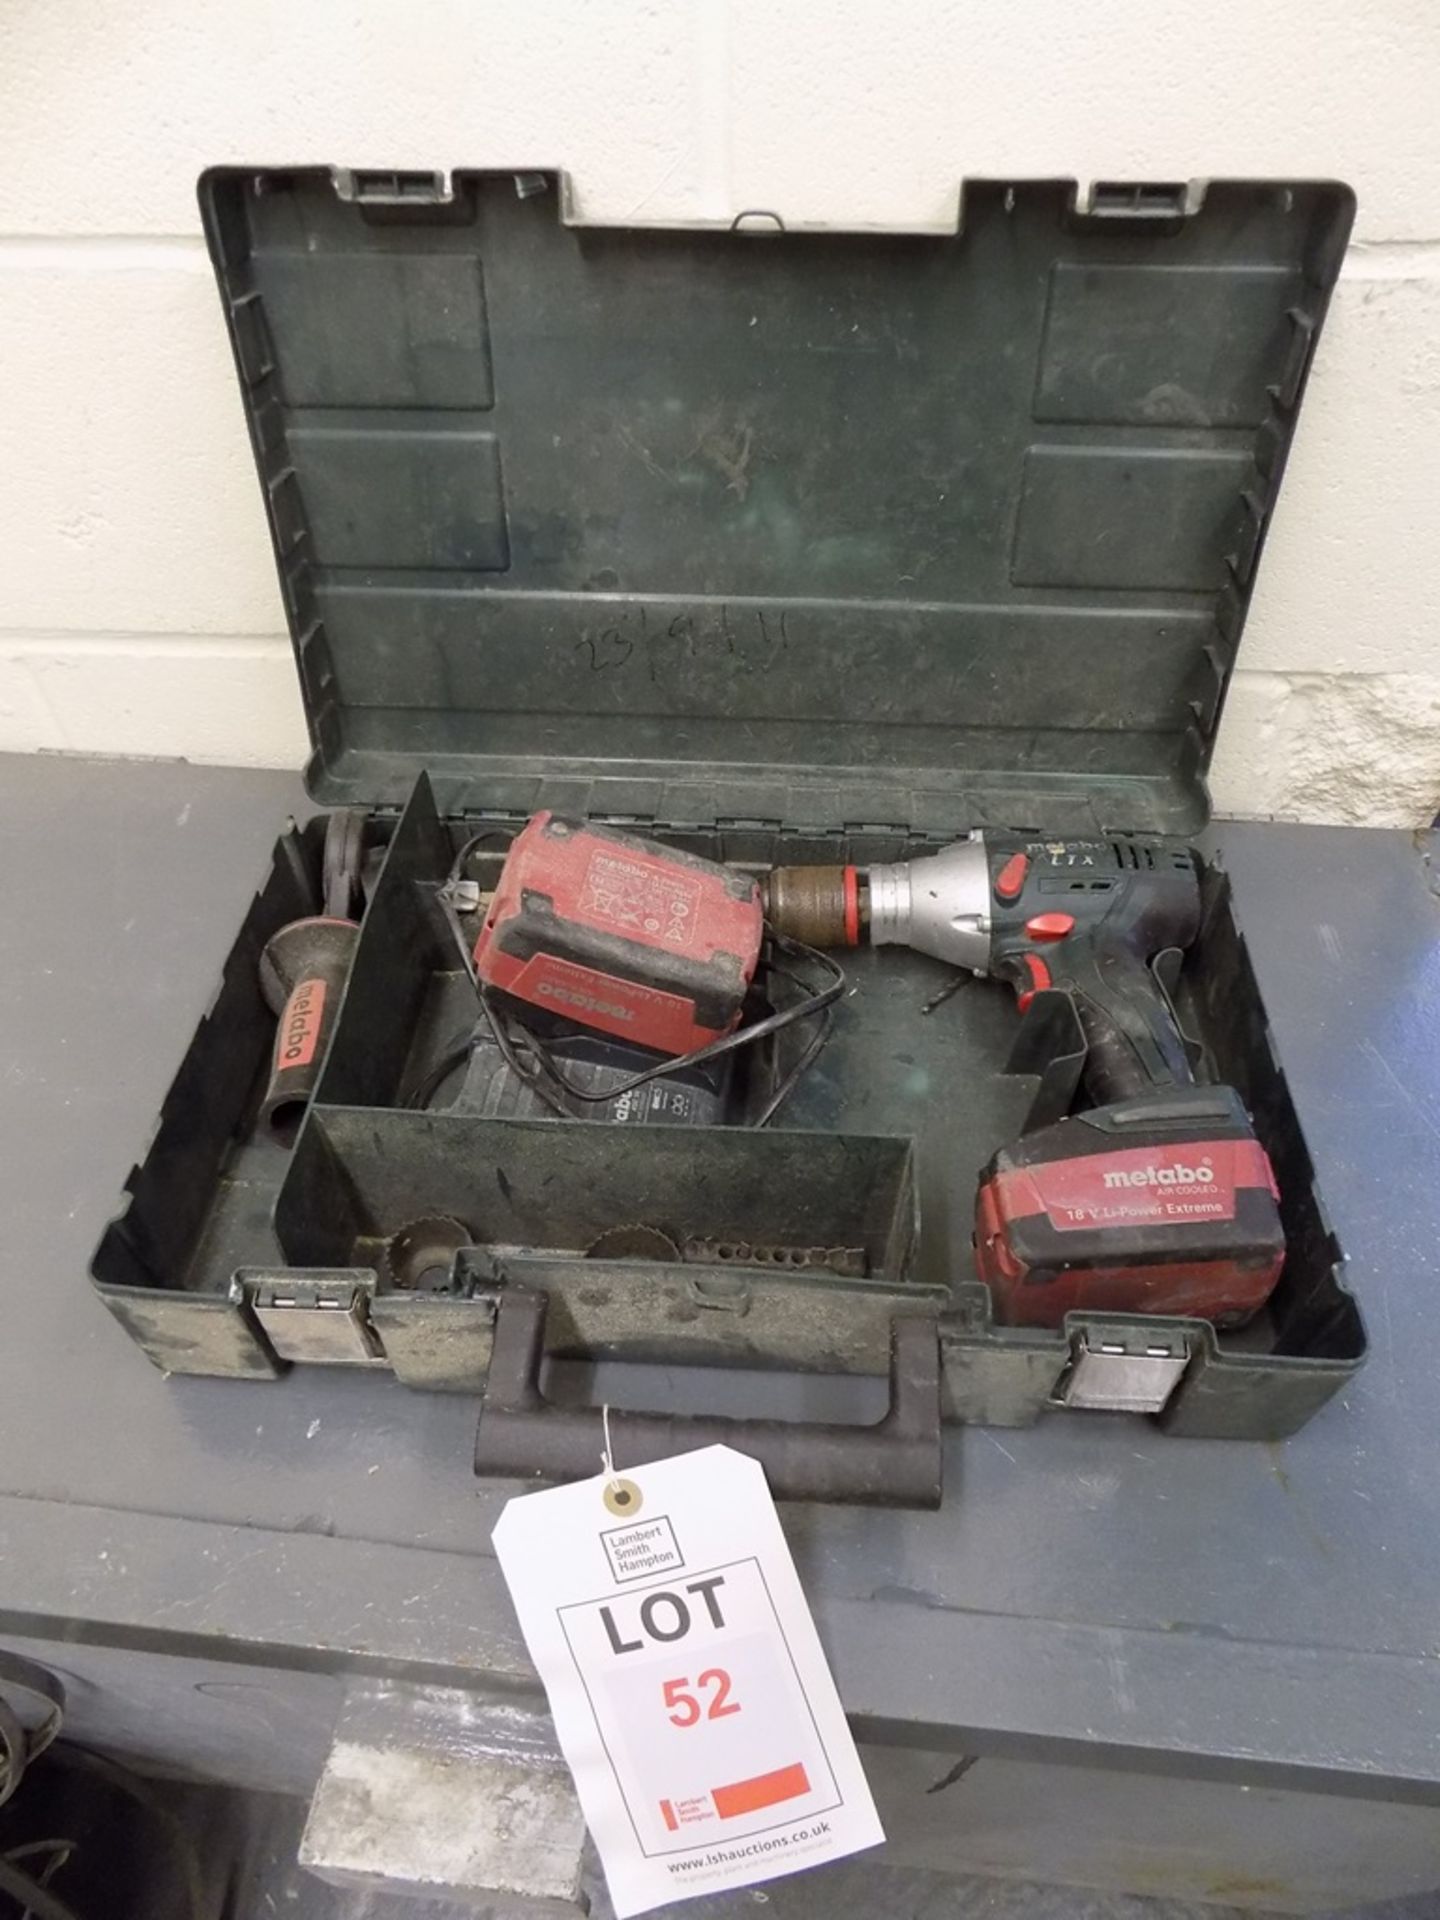 Metabo LTX cordless power drill, with battery pack and case